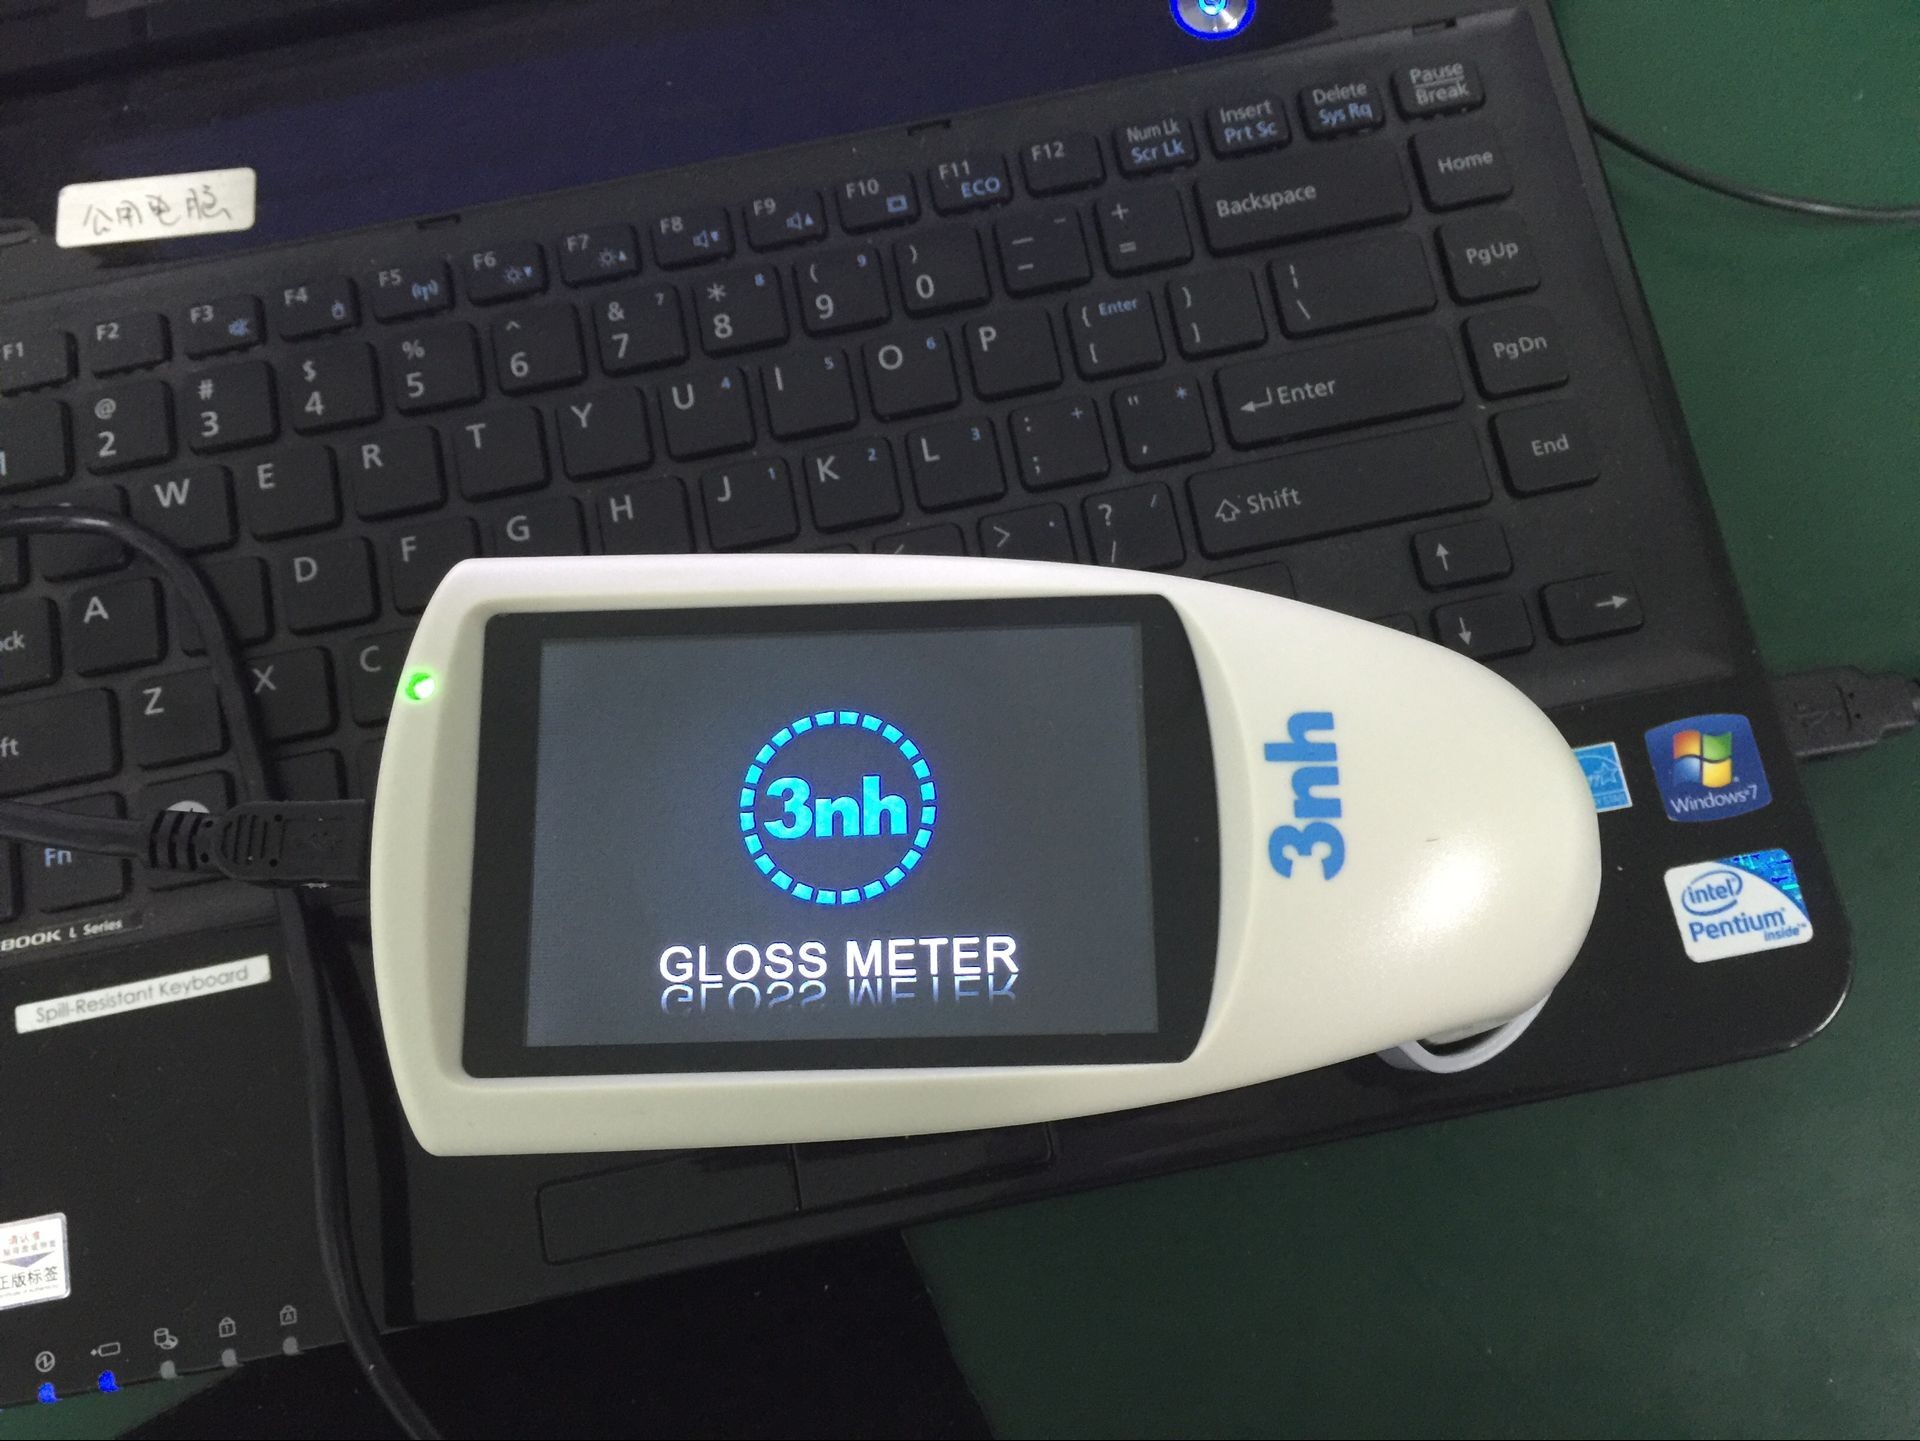  HG268 Triangle Gloss Meter 1000GU 0.1GU With 3.5" TFT Display Manufactures